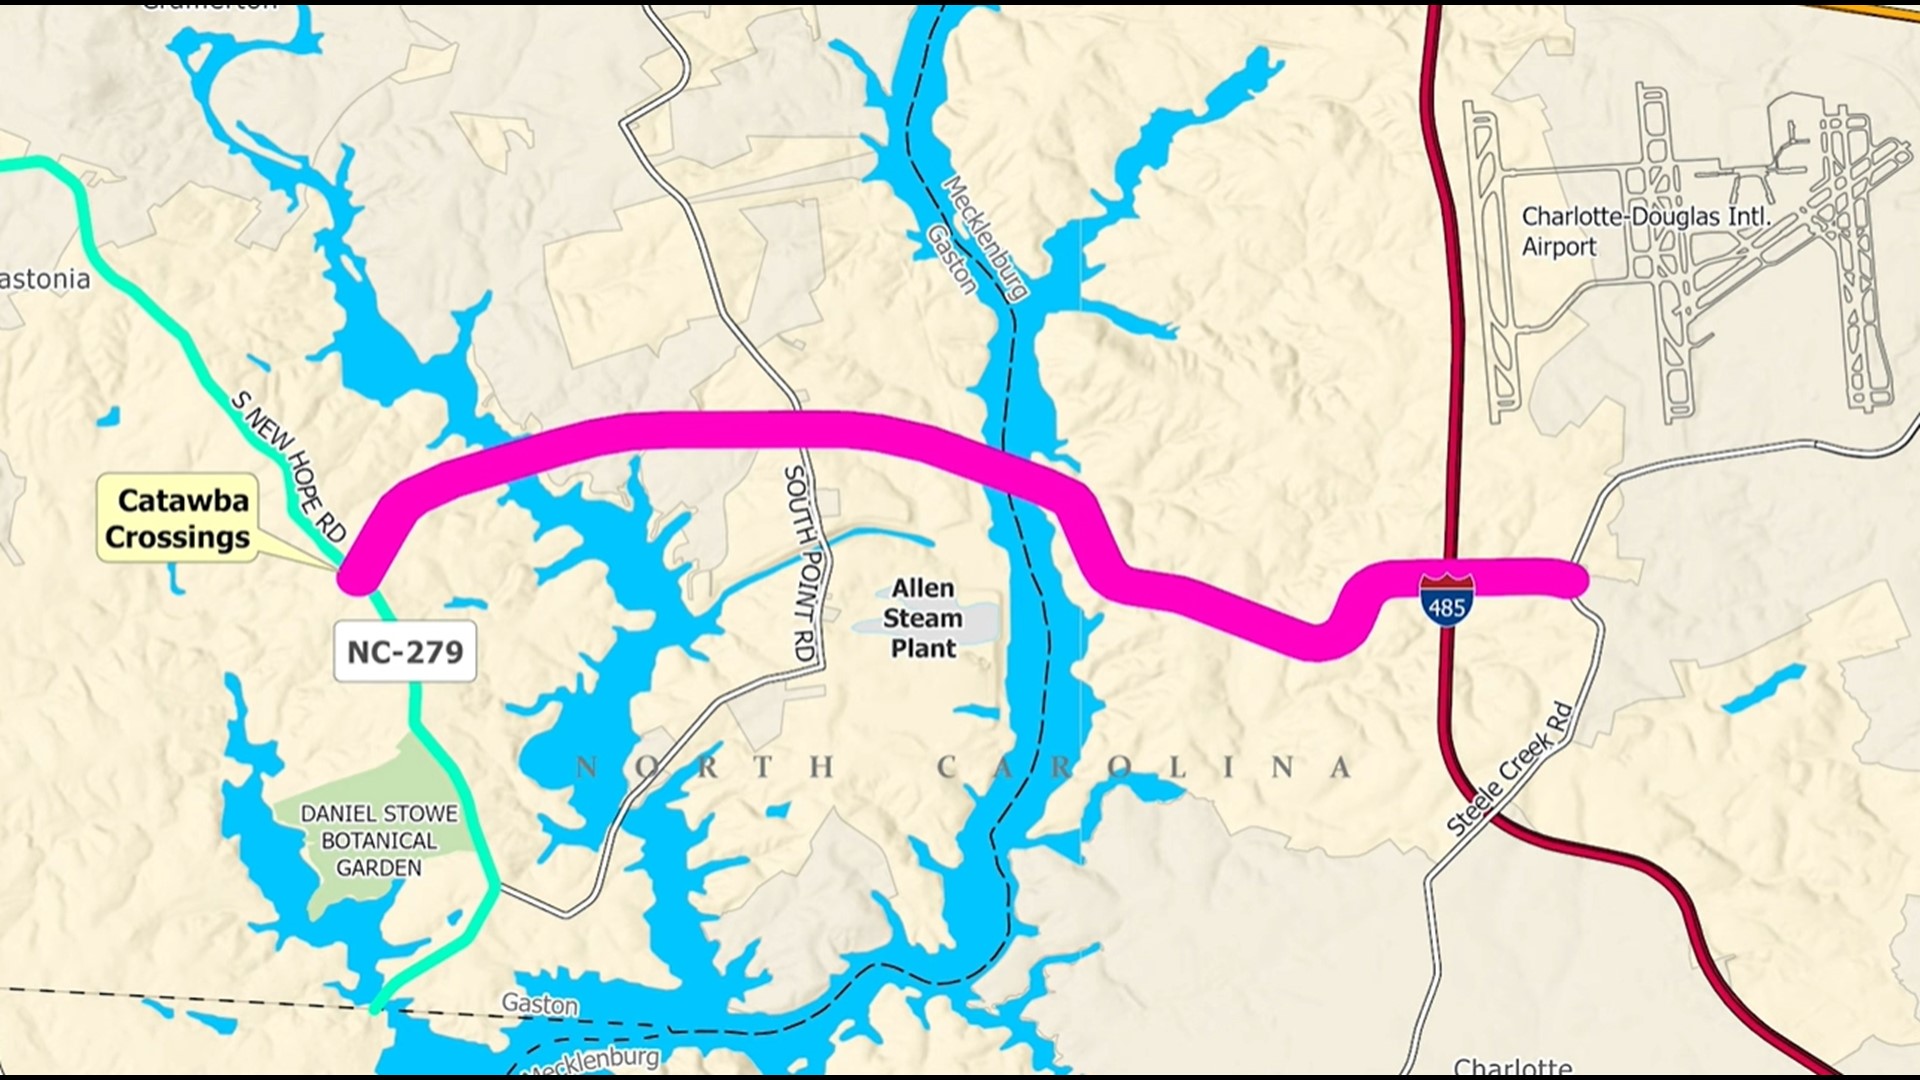 Catawba Crossings is the latest proposal in a decades-long debate to build a new road spanning the Catawba River to connect Gaston and Mecklenburg Counties.